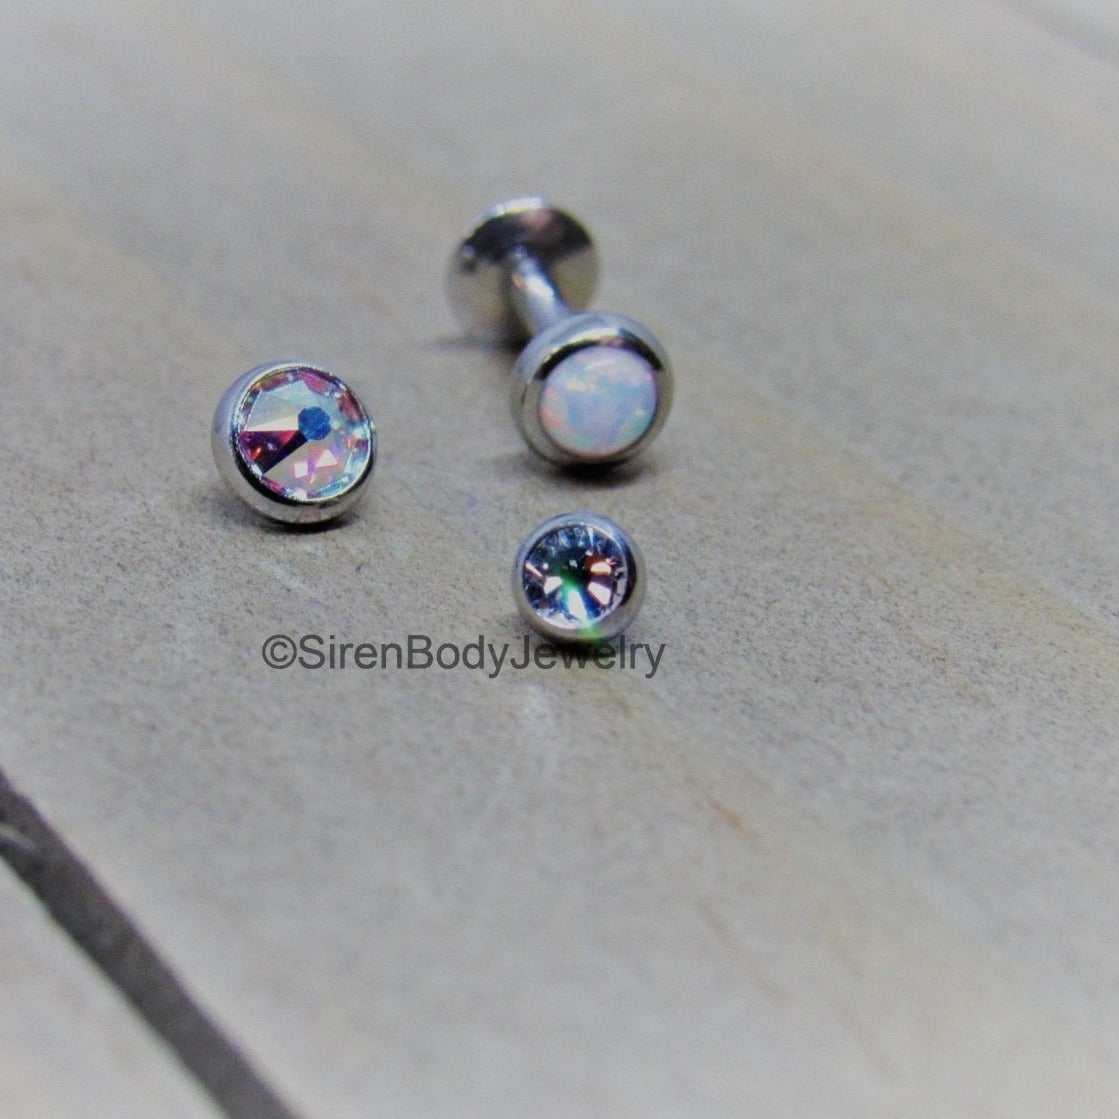 18g-16g Triple cartilage forward helix earlobe conch set of 3 gemstone ends white opal clear aurora borealis pick your gauge and length - SirenBodyJewelry